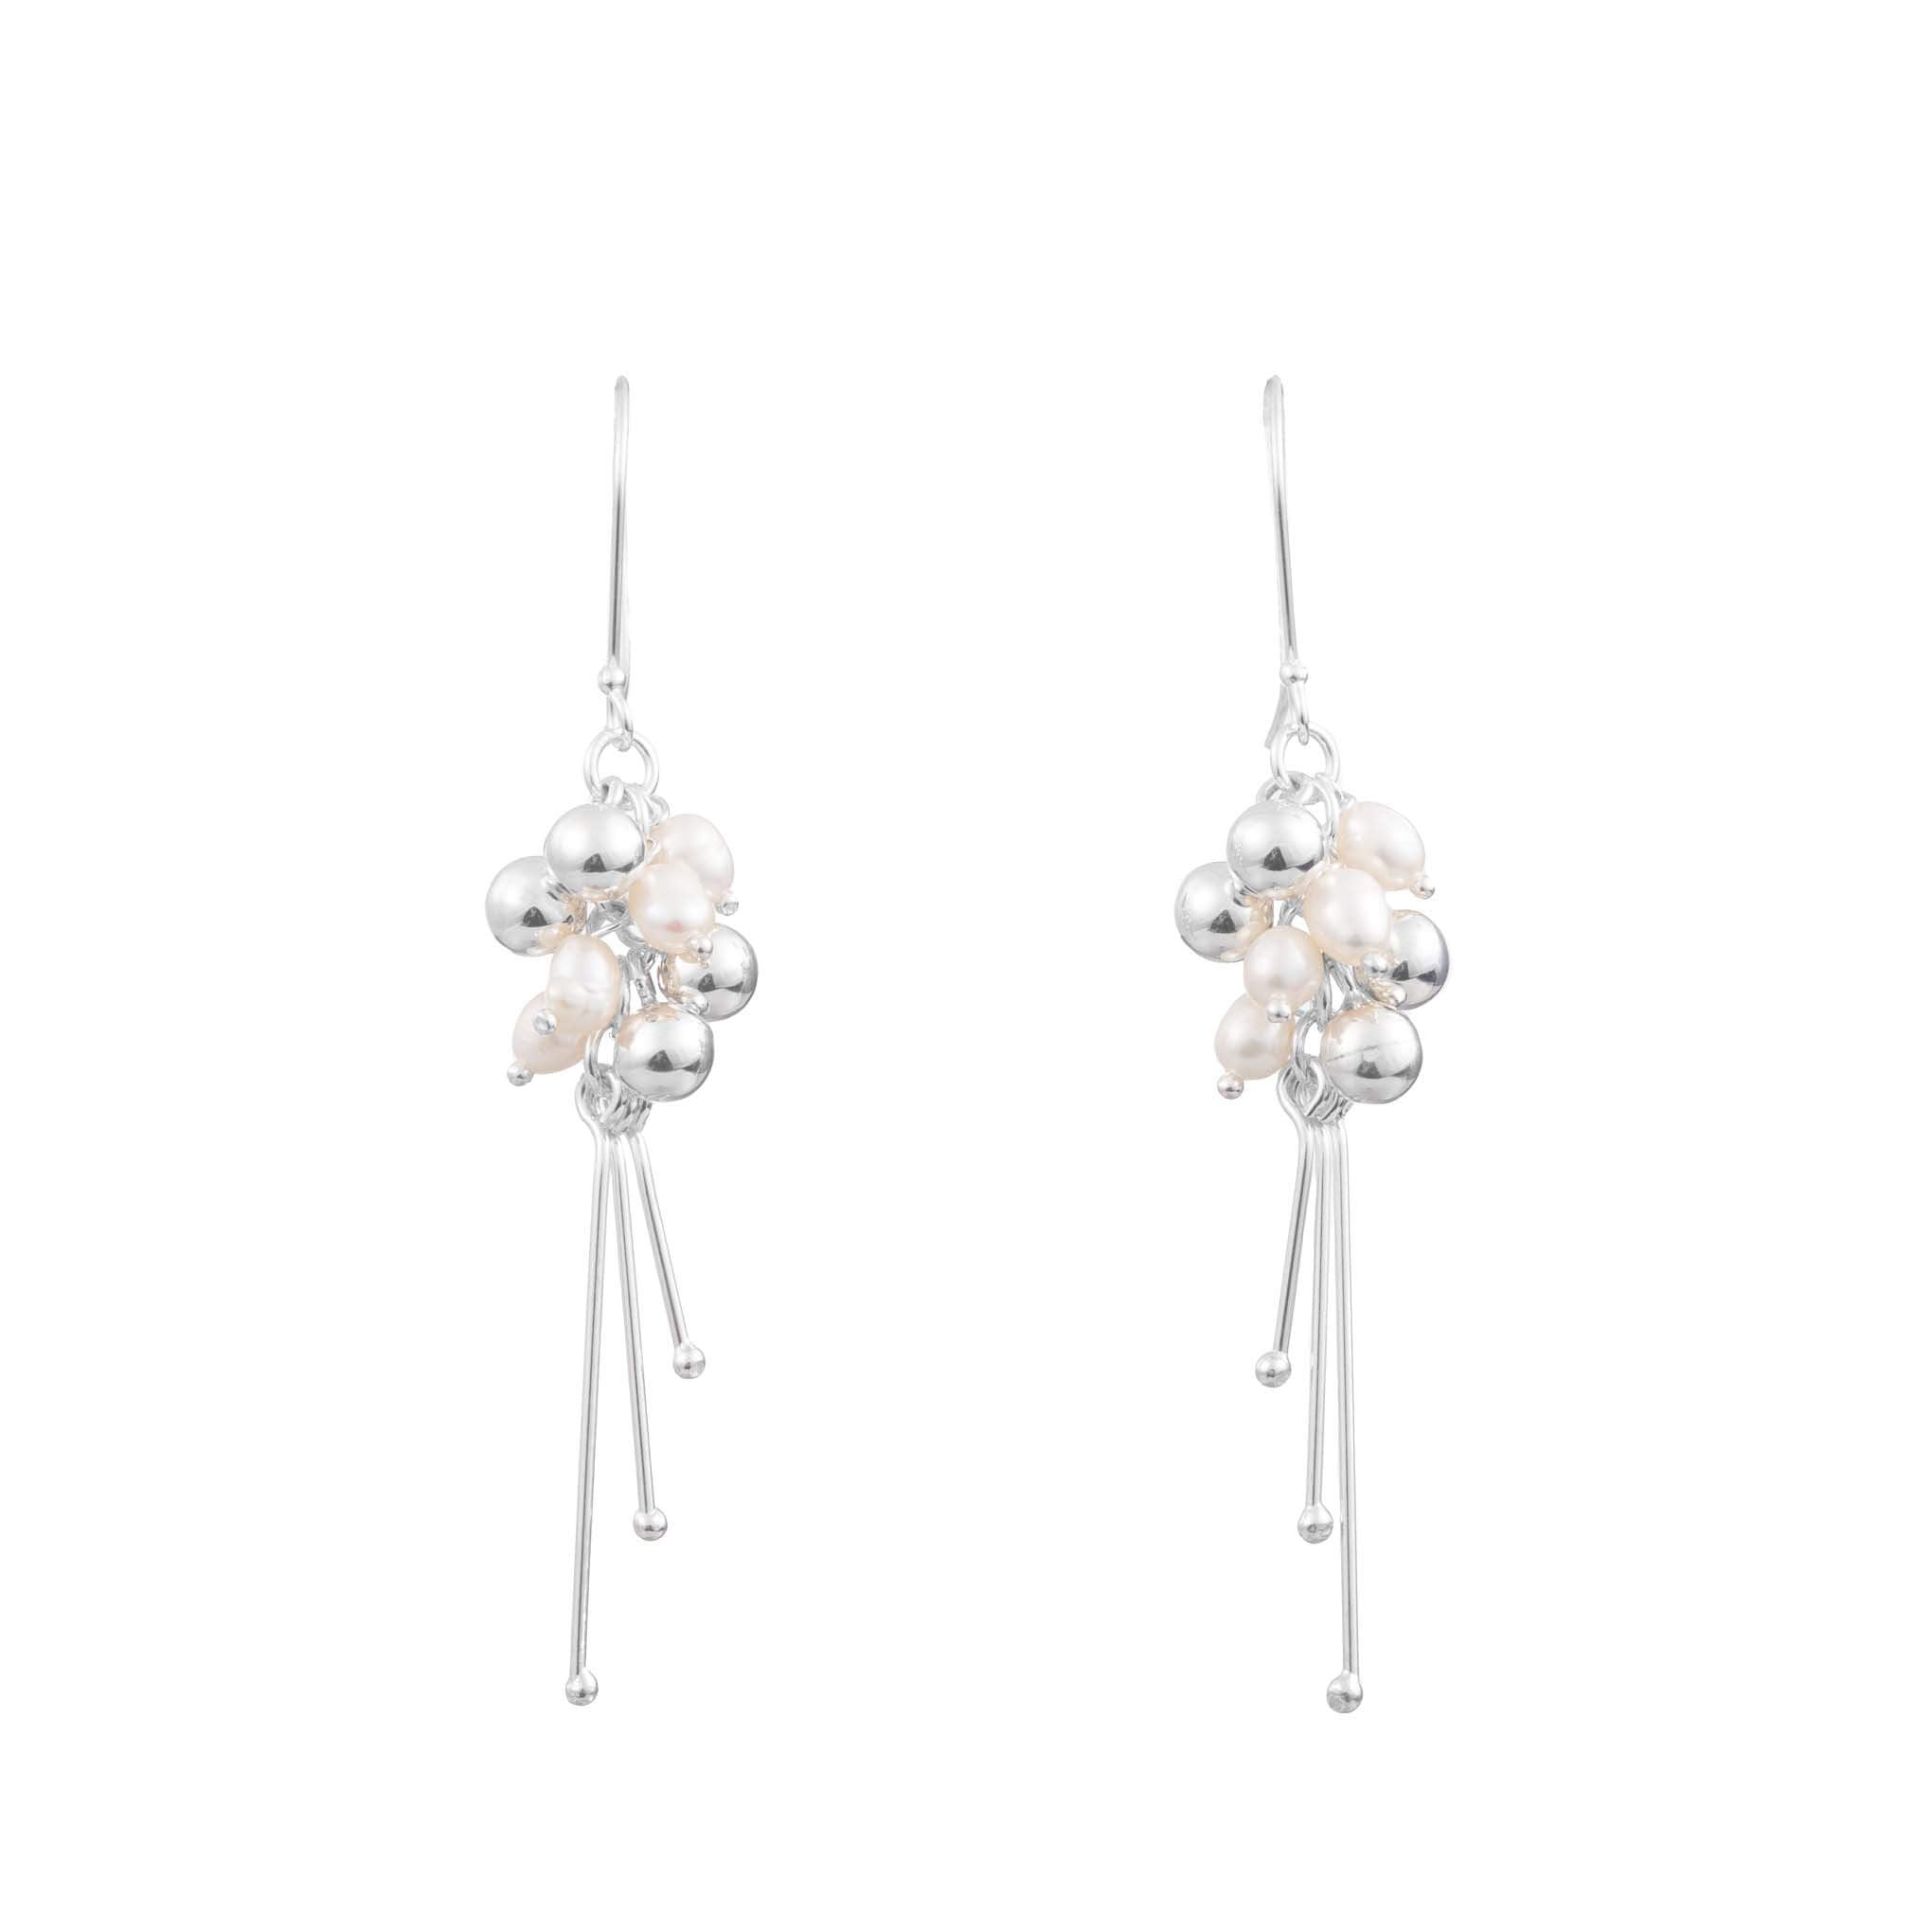 Silver earrings with spheres and pearls